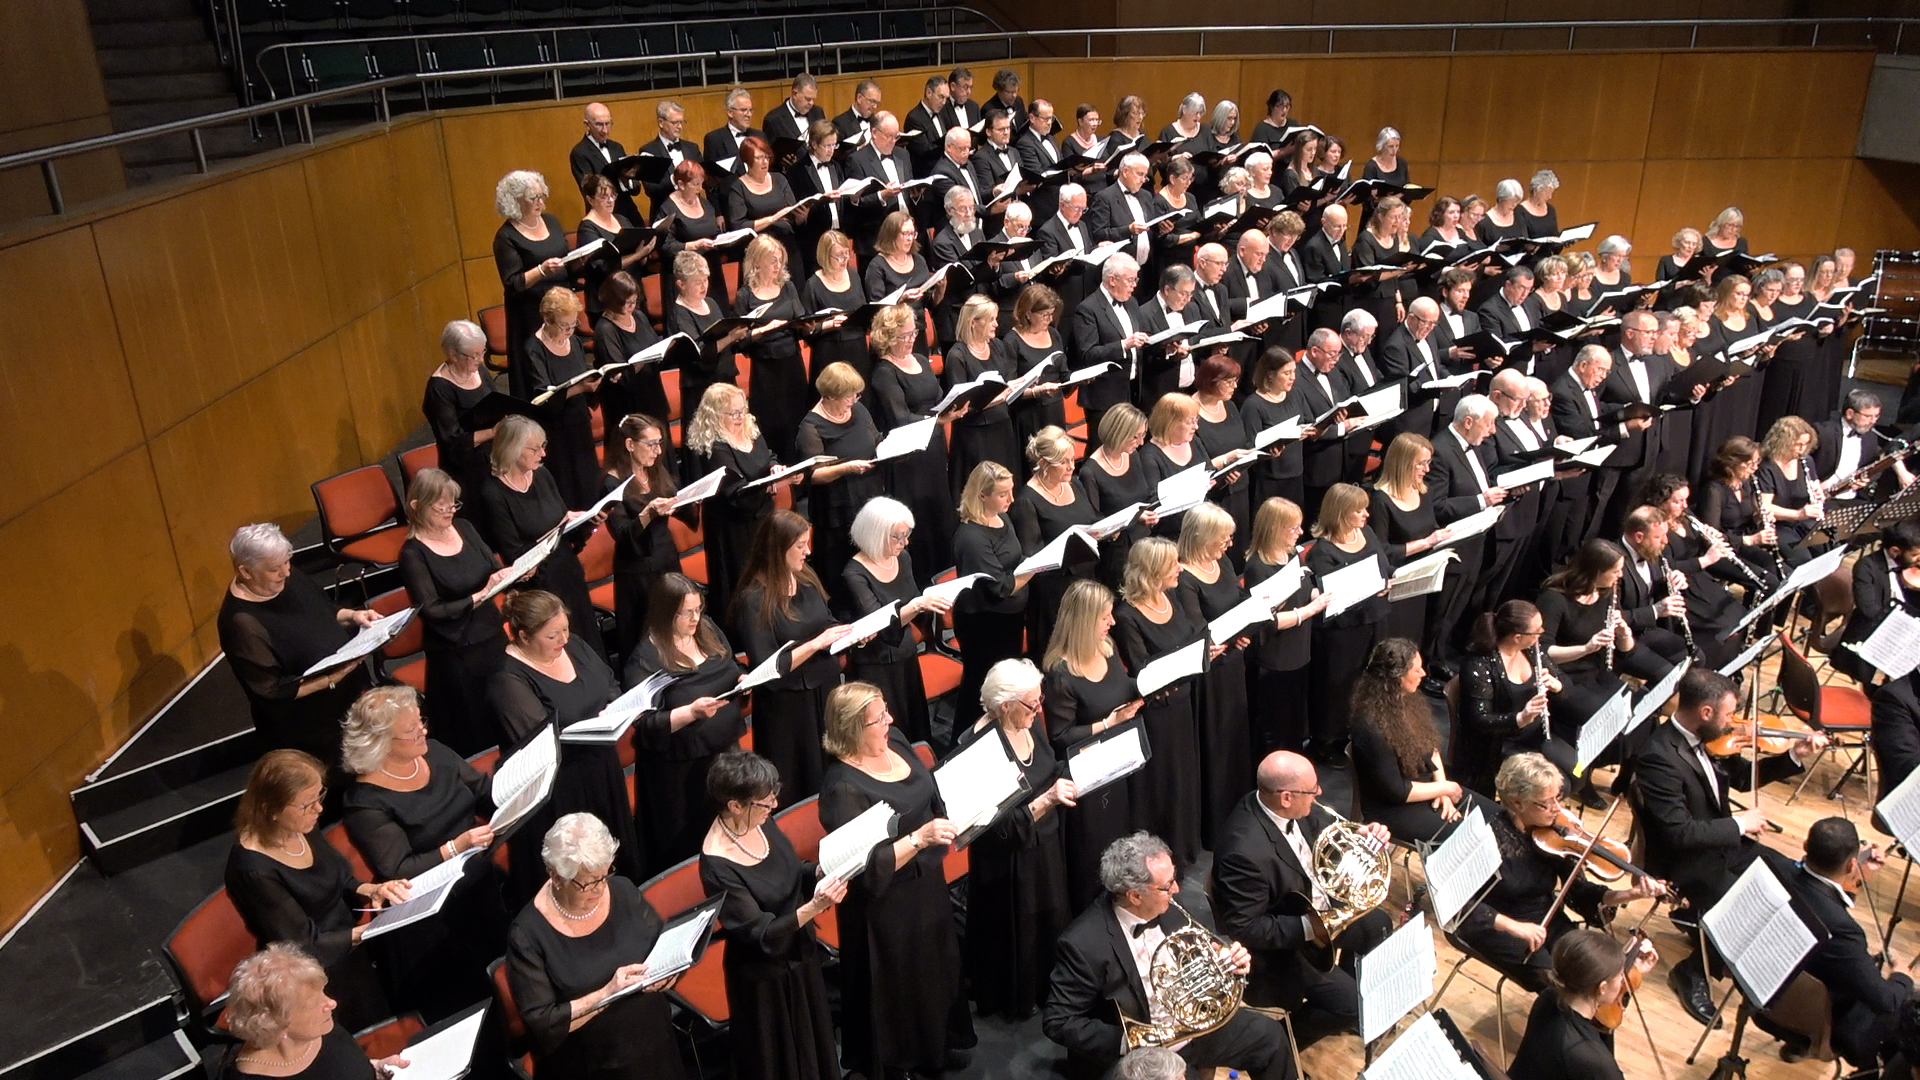 Limerick Choral Union concert to celebrate 60 years on December 2nd at UCH